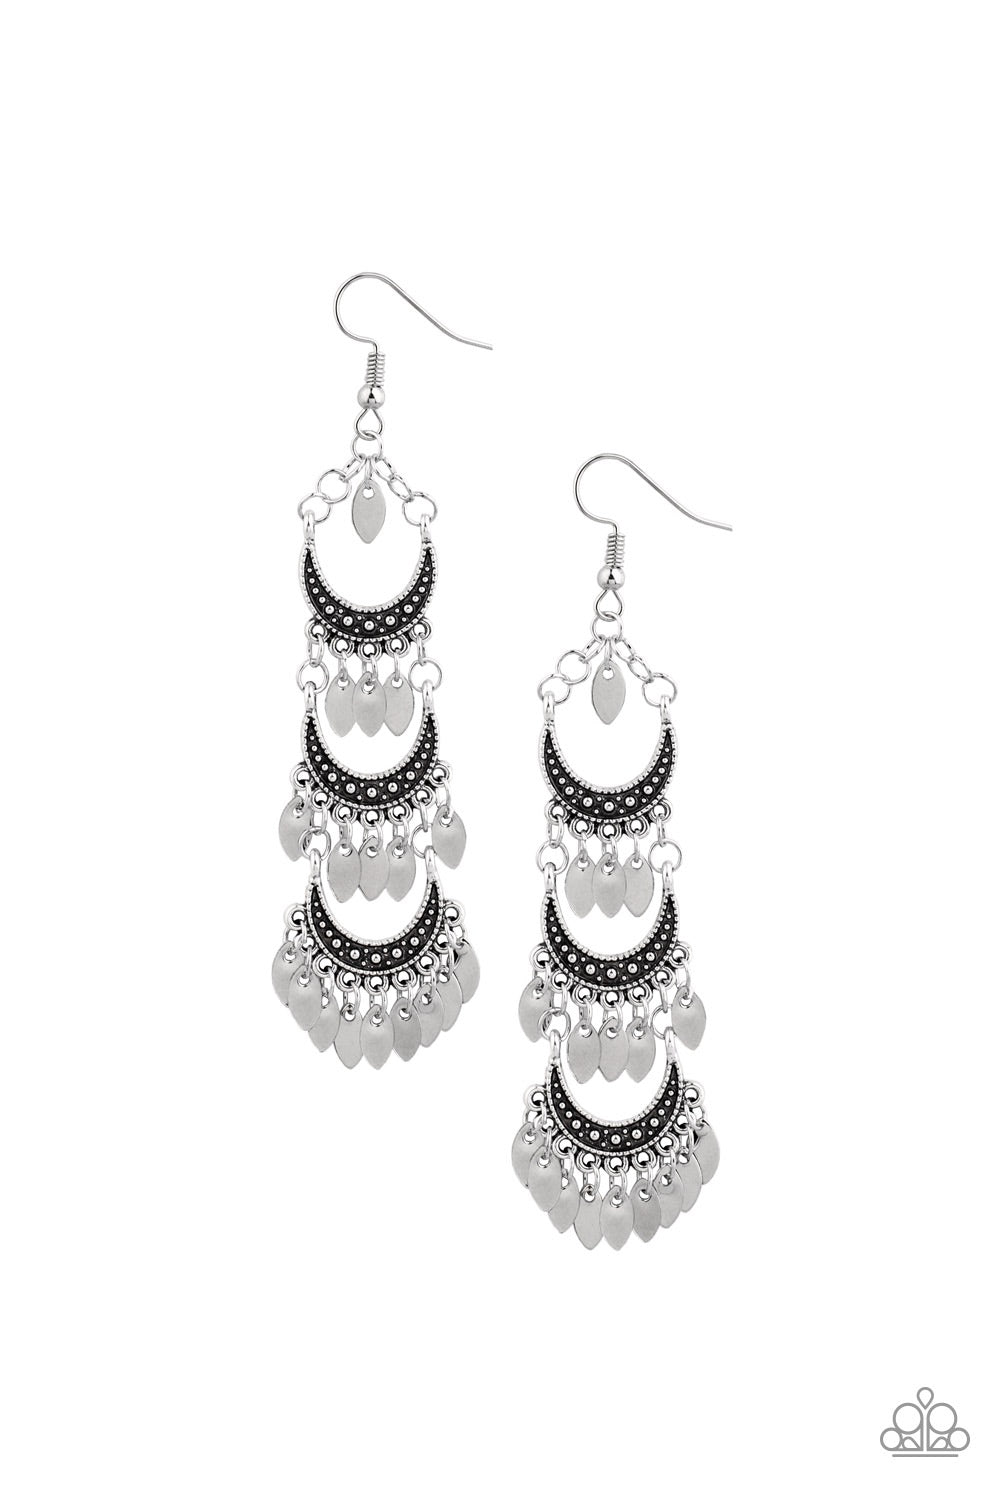 Take Your CHIME Silver-Earrings